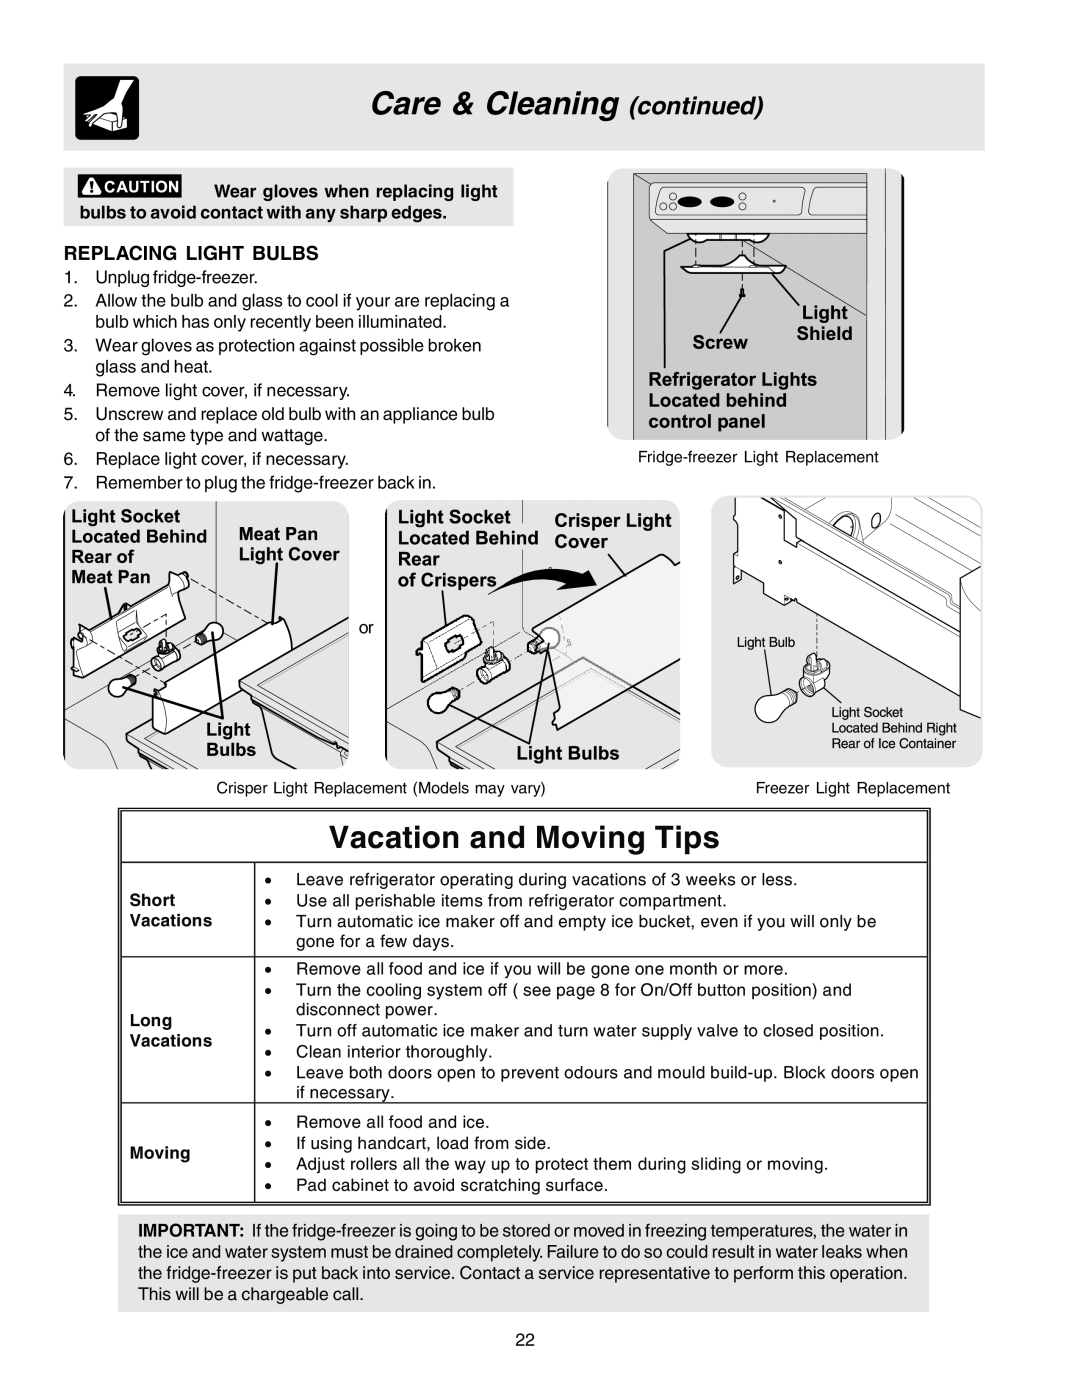 Electrolux U27107 manual Care & Cleaning continued, Vacation and Moving Tips, Replacing Light Bulbs 